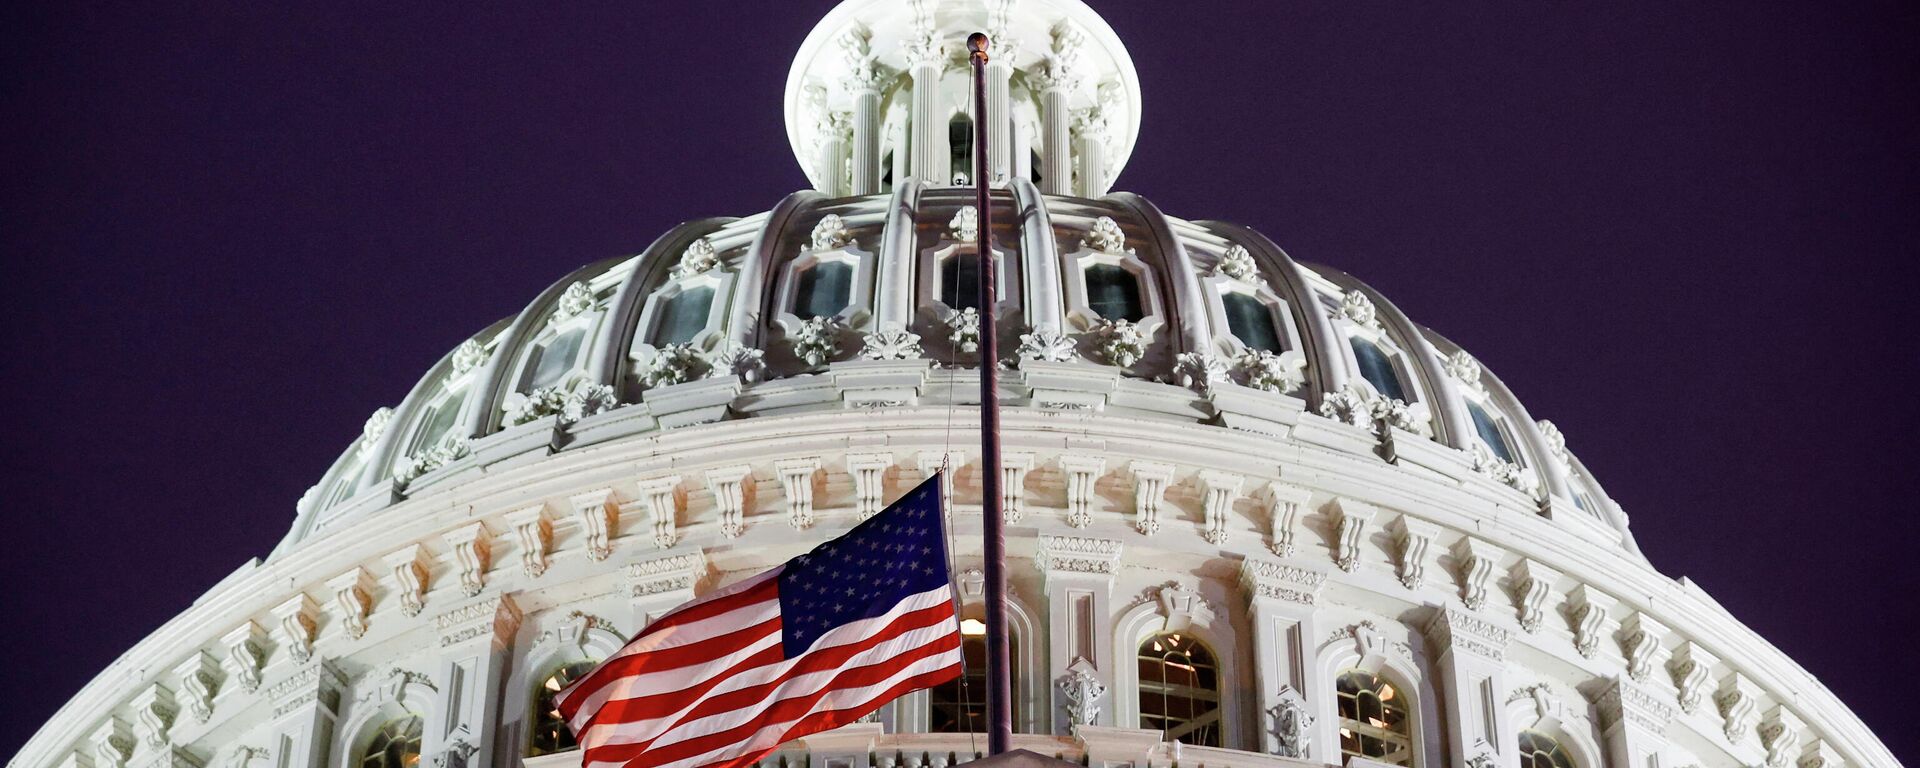 A flag of the United States is seen at halfstaff on the U.S. Capitol building during a prayer vigil in observance of the first anniversary of the January 6, 2021 attack on the Capitol by supporters of former President Donald Trump, on Capitol Hill in Washington, U.S., January 6, 2022. REUTERS/Jonathan Ernst - Sputnik International, 1920, 13.01.2022